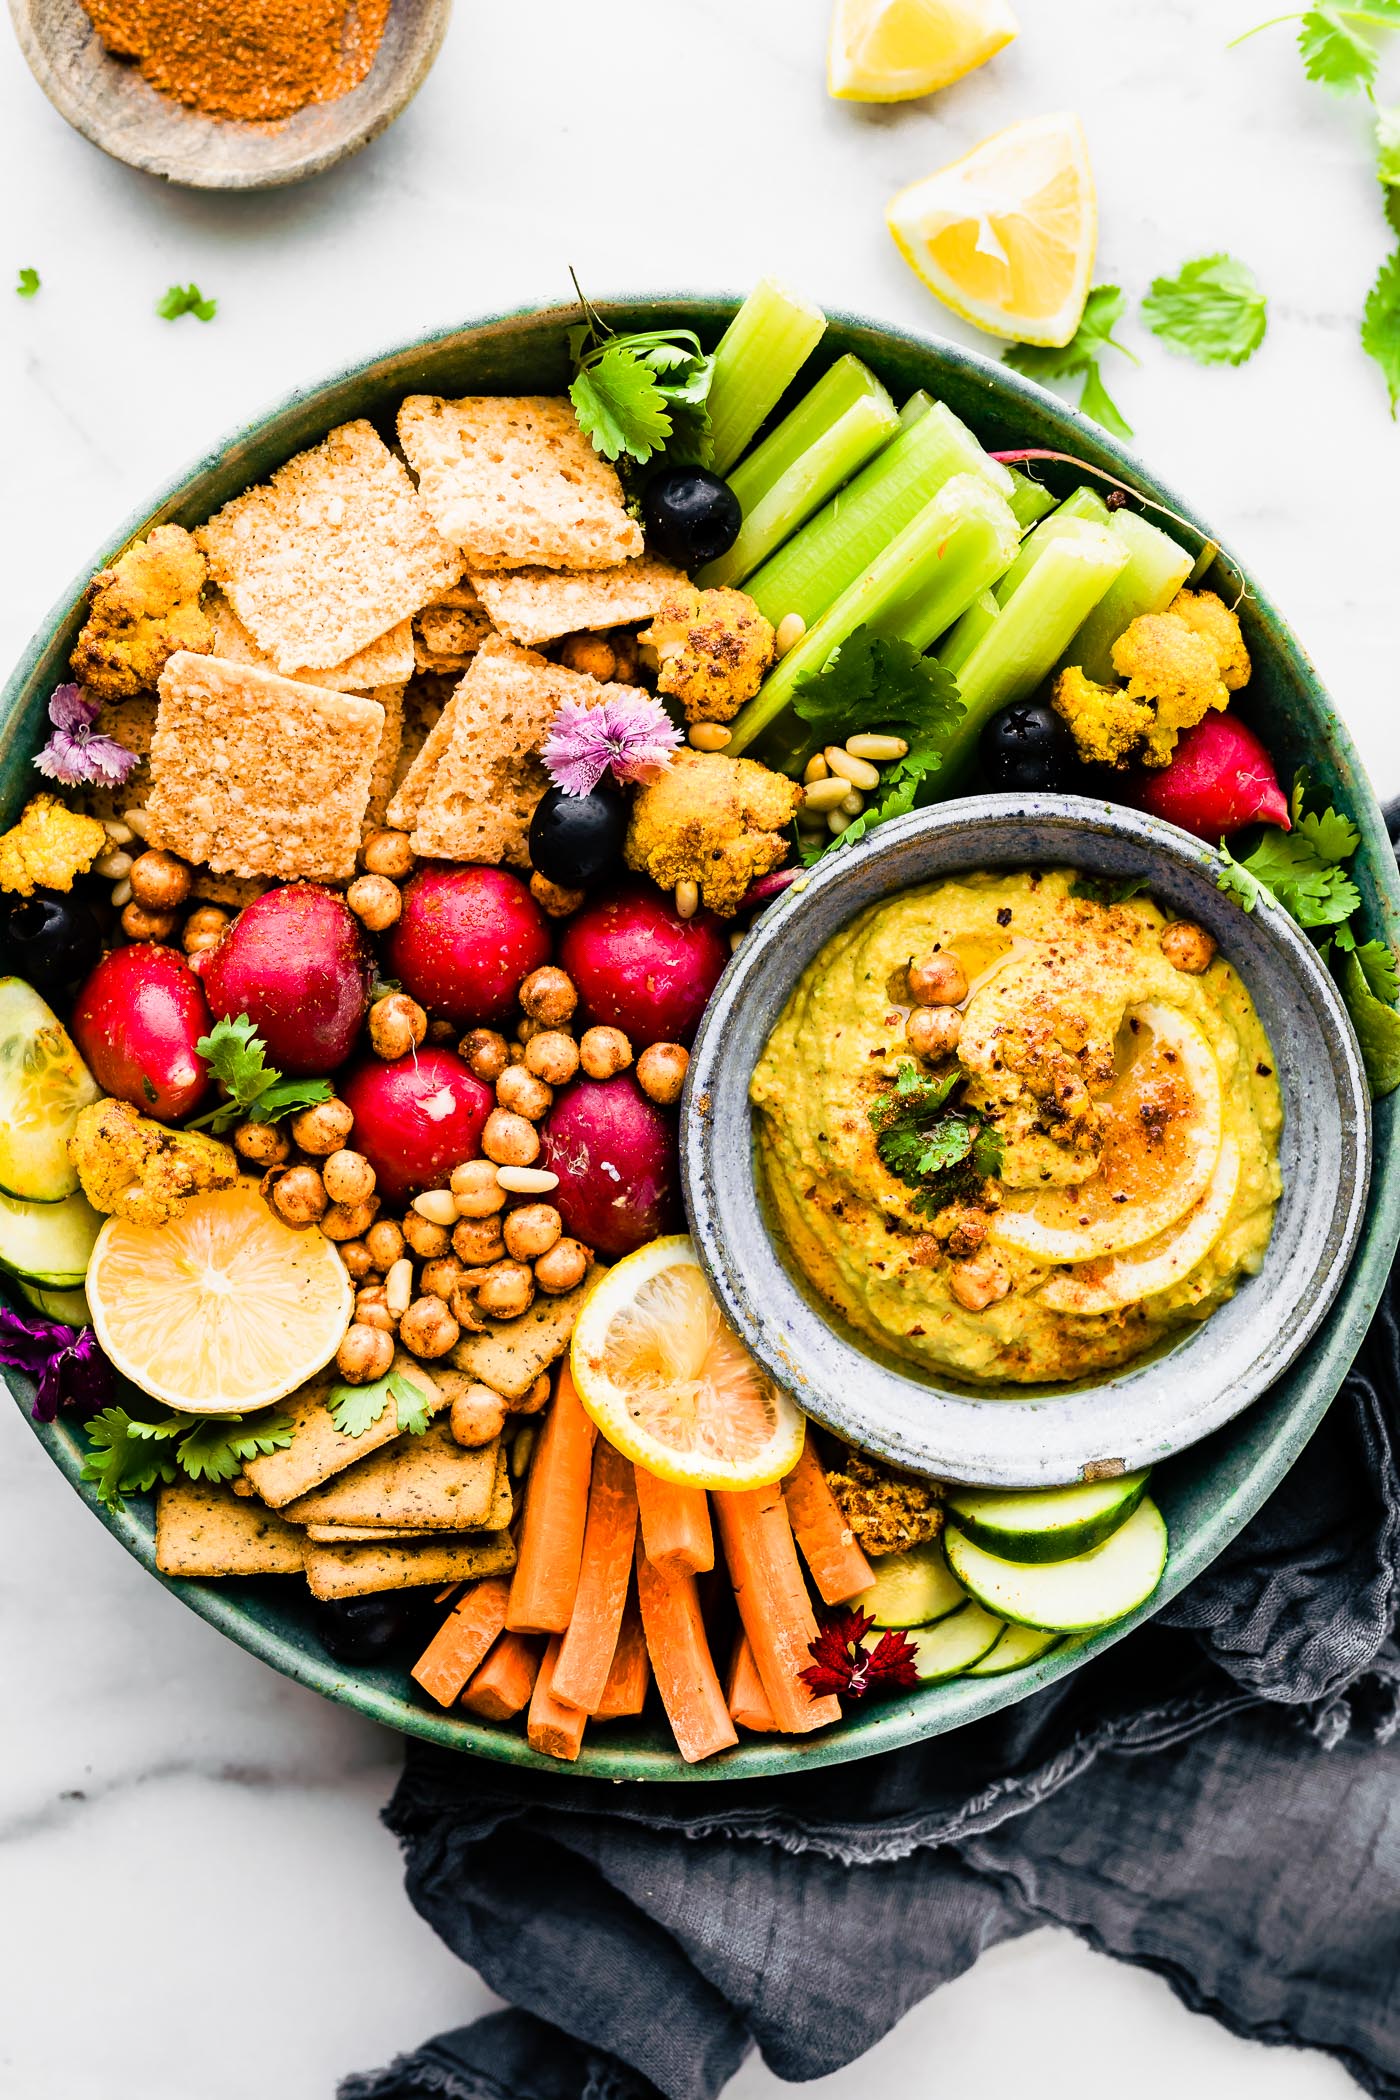 Overhead view turquoise tray filled with crackers and vegetables, grey stone bowl filled with Tandoori roasted cauliflower dip.